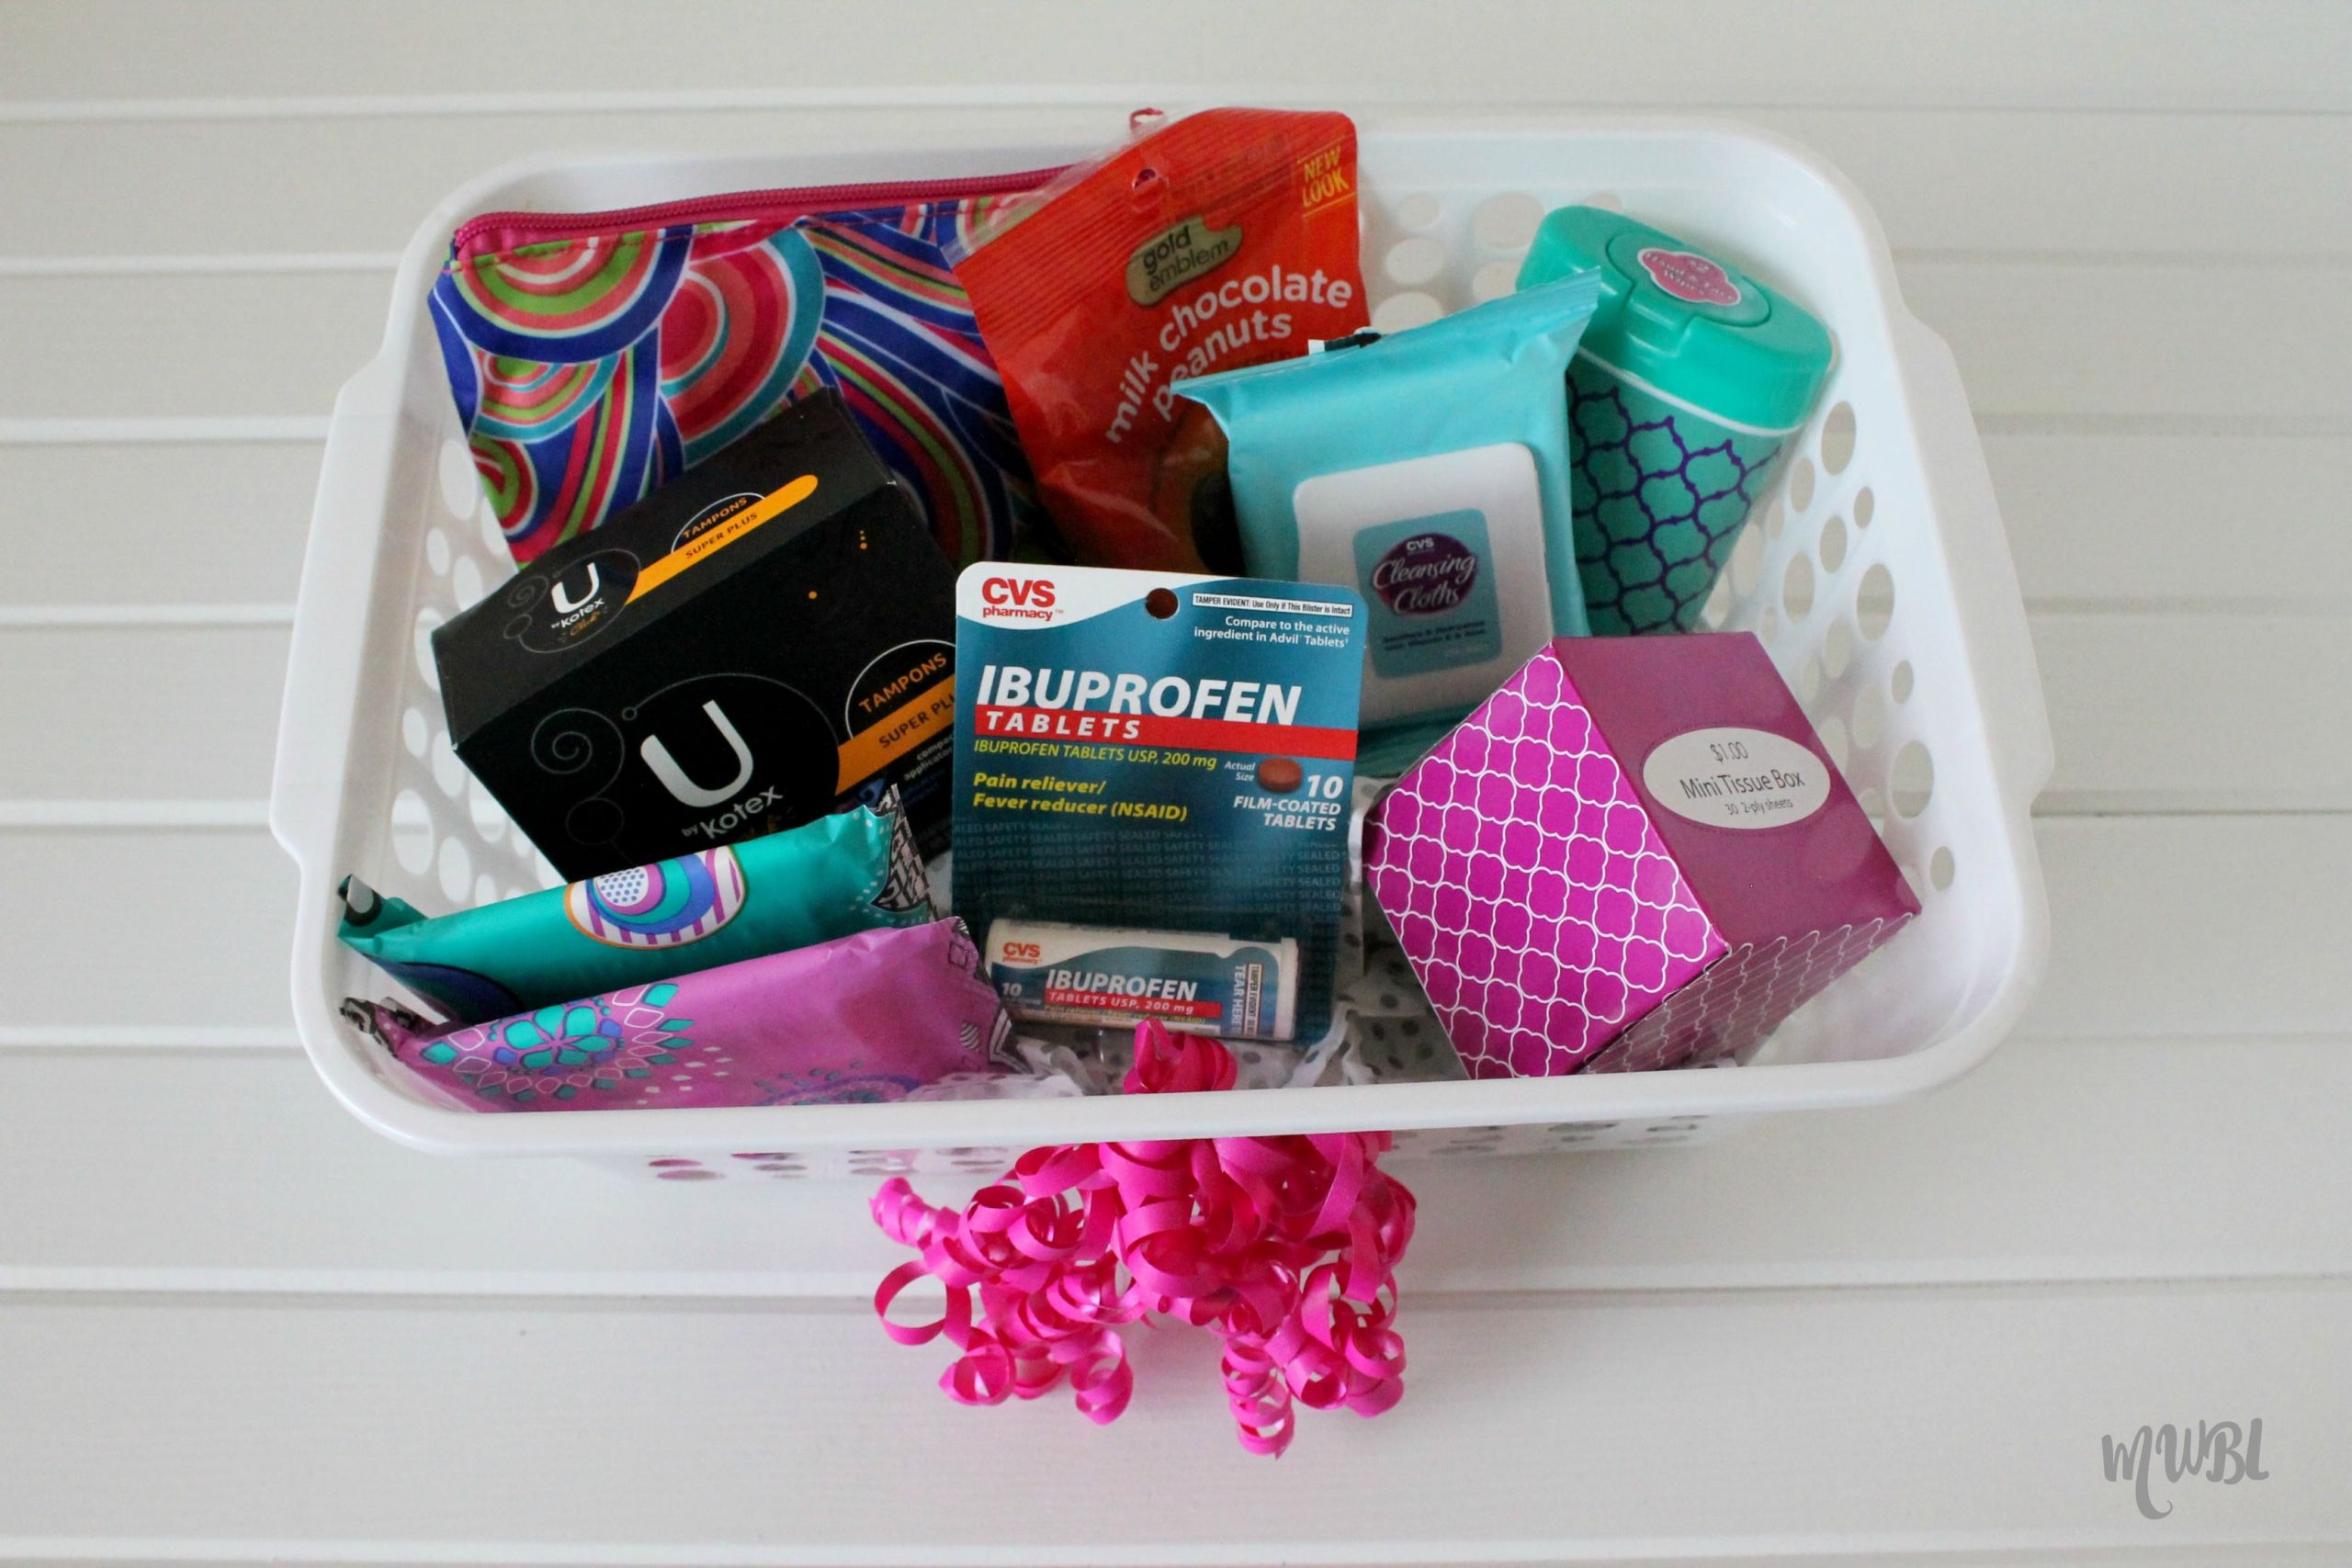 Pamper Gift Basket Ideas
 6 Ways to Feel Better During Your Period Pampering Gift